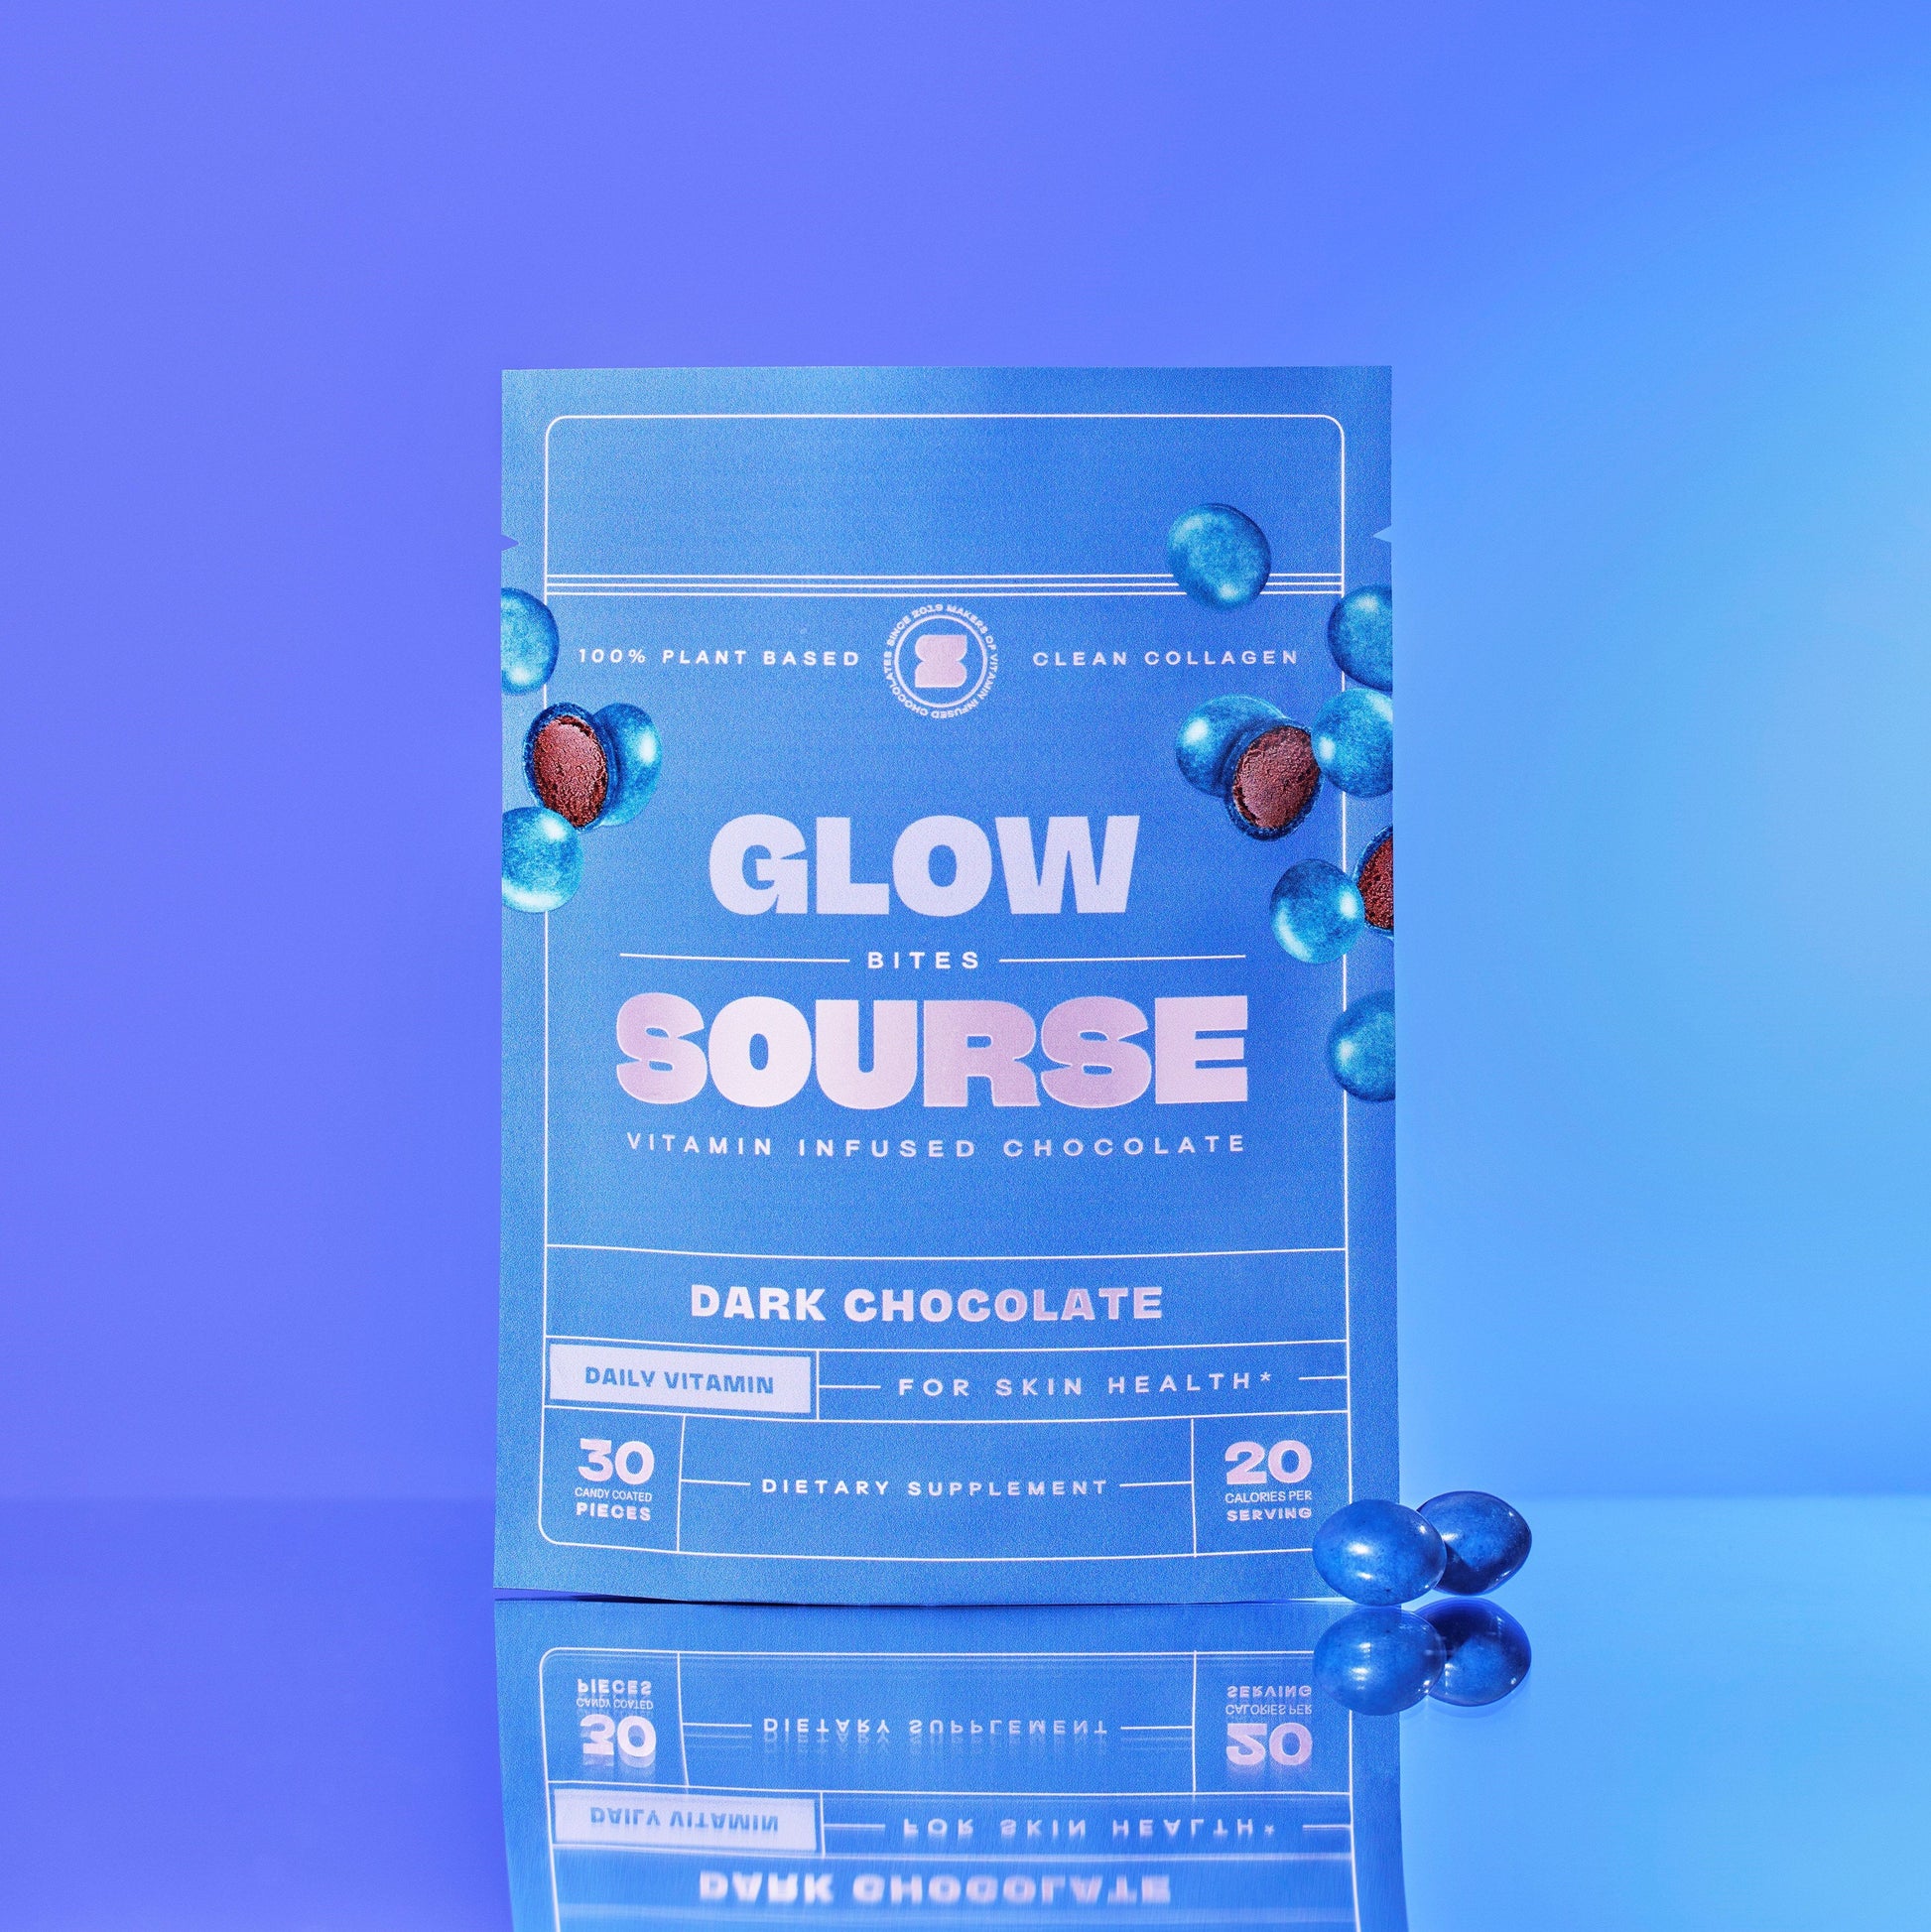 Glow Bites from Sourse